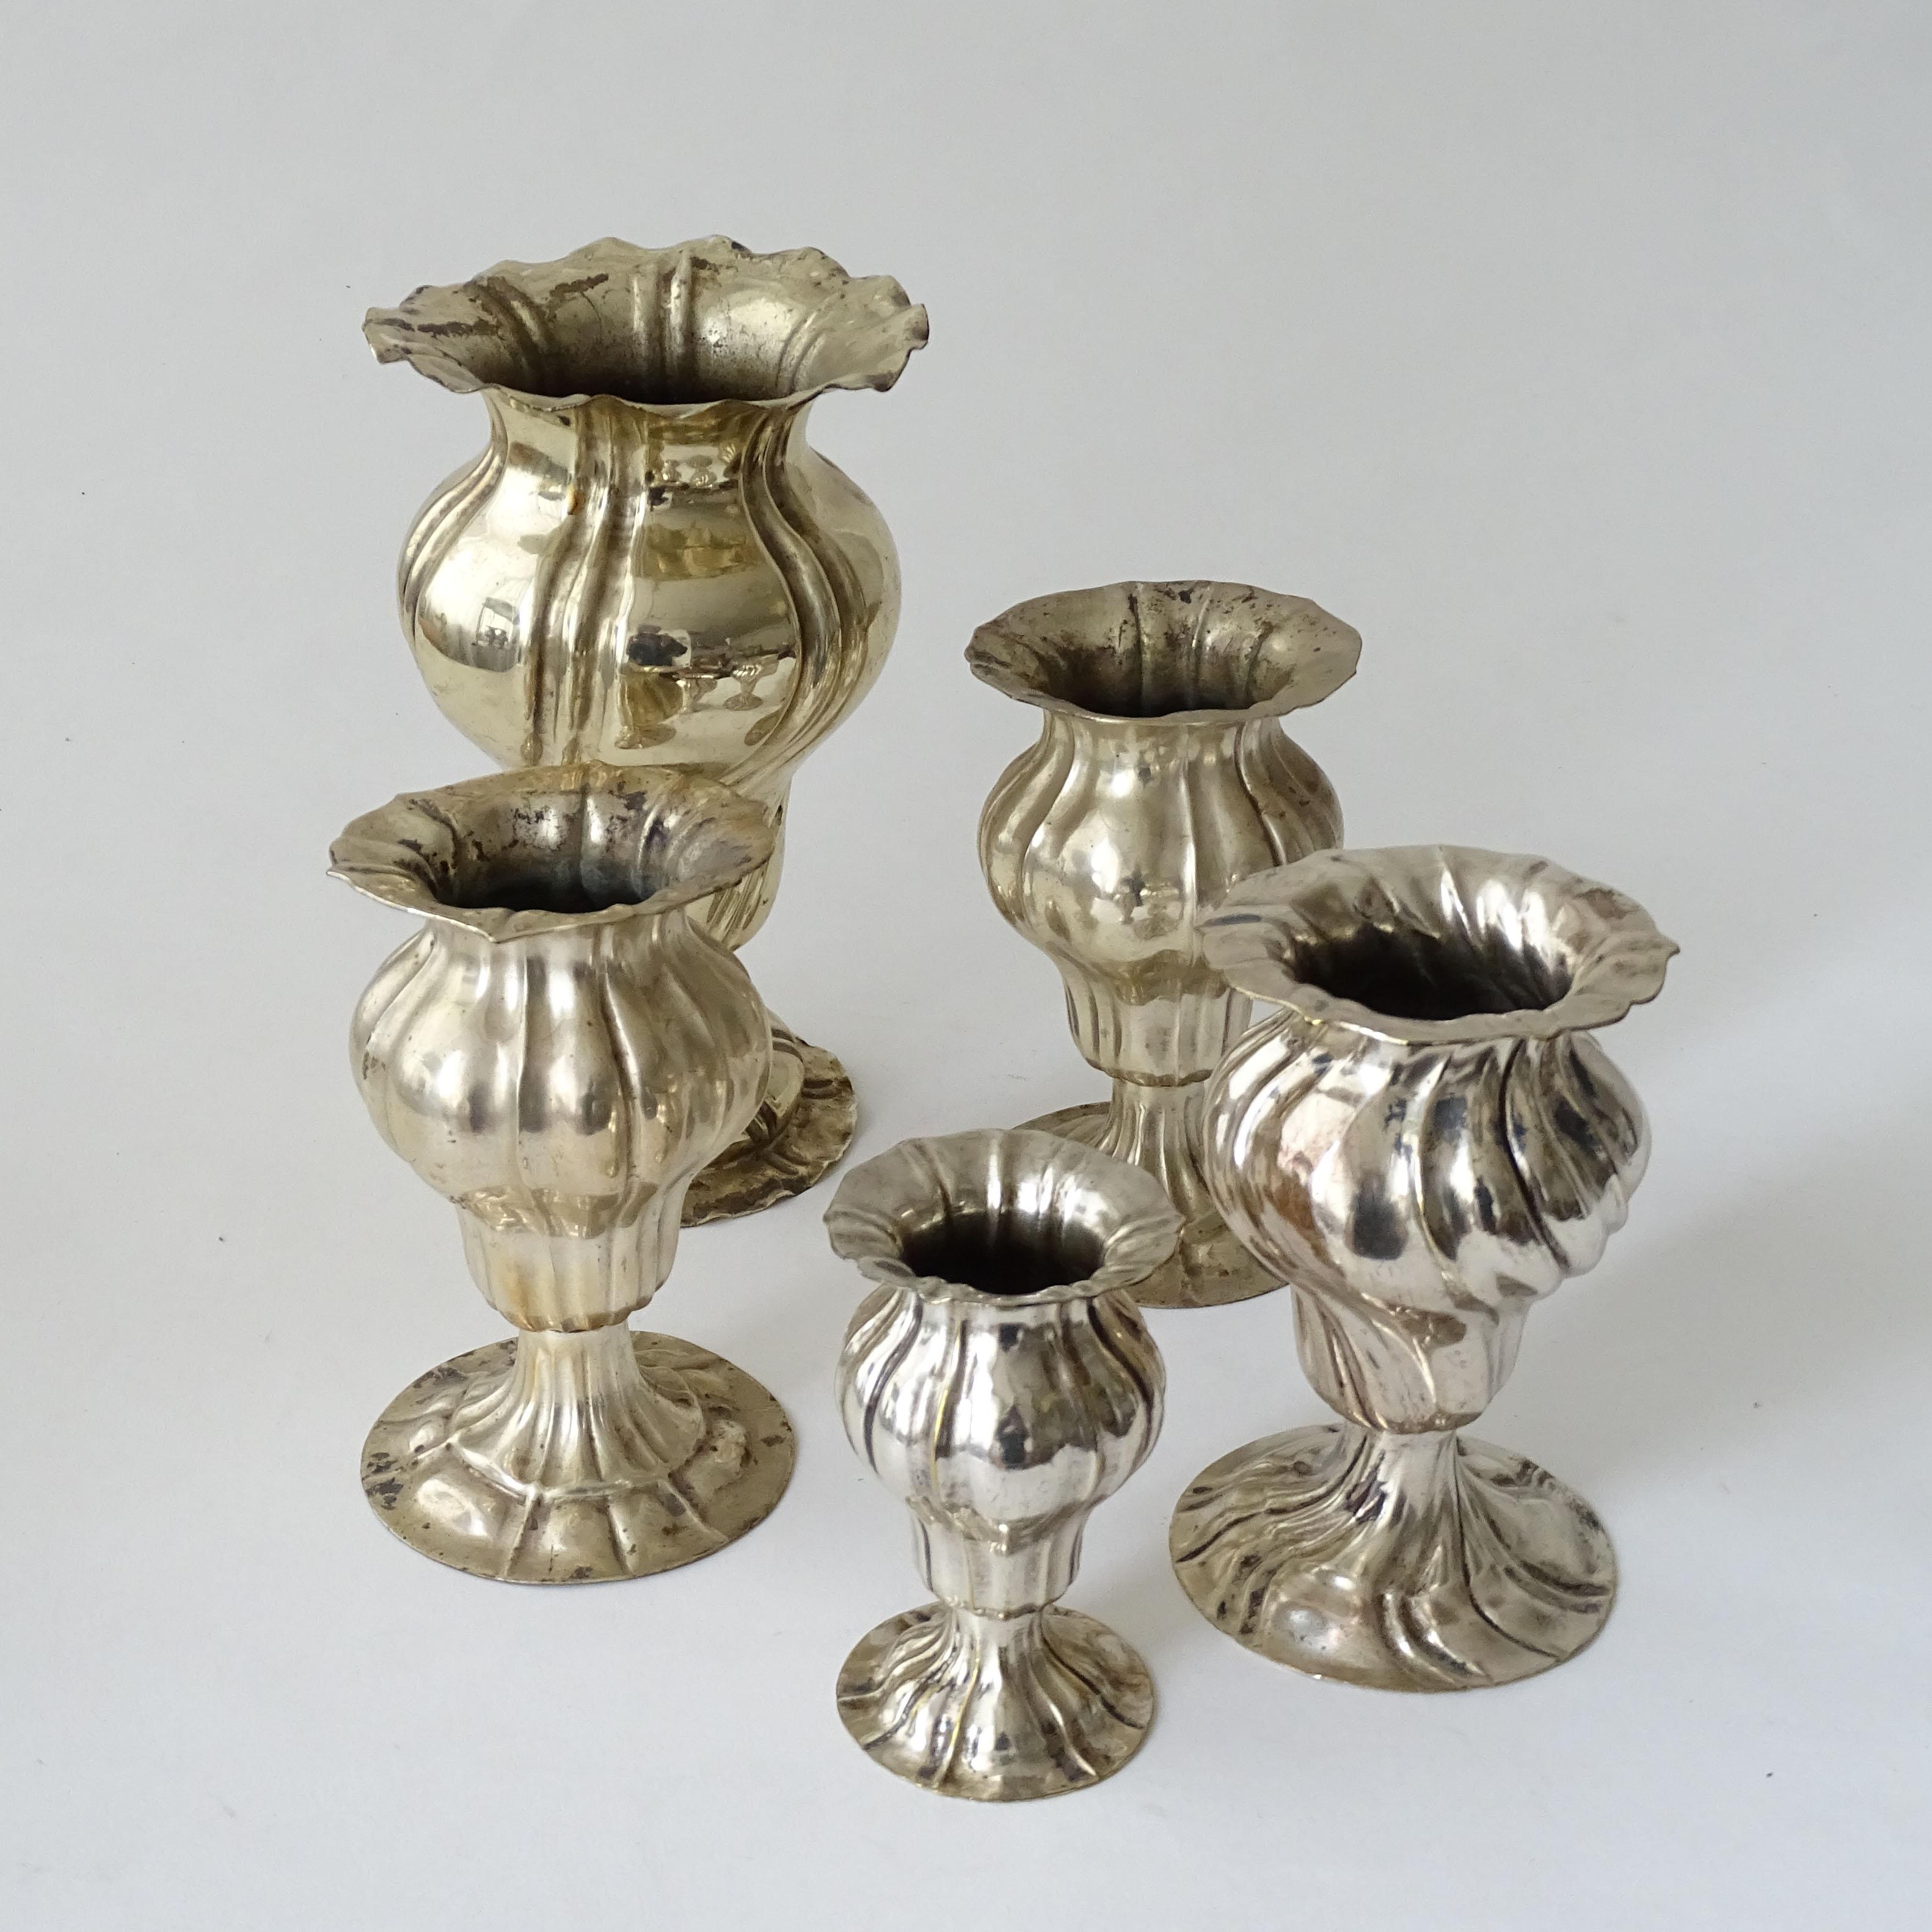 Five Small Antique Silverplate Soliflor Vases, Italy 1920s
For beautiful dining table flower decoration.